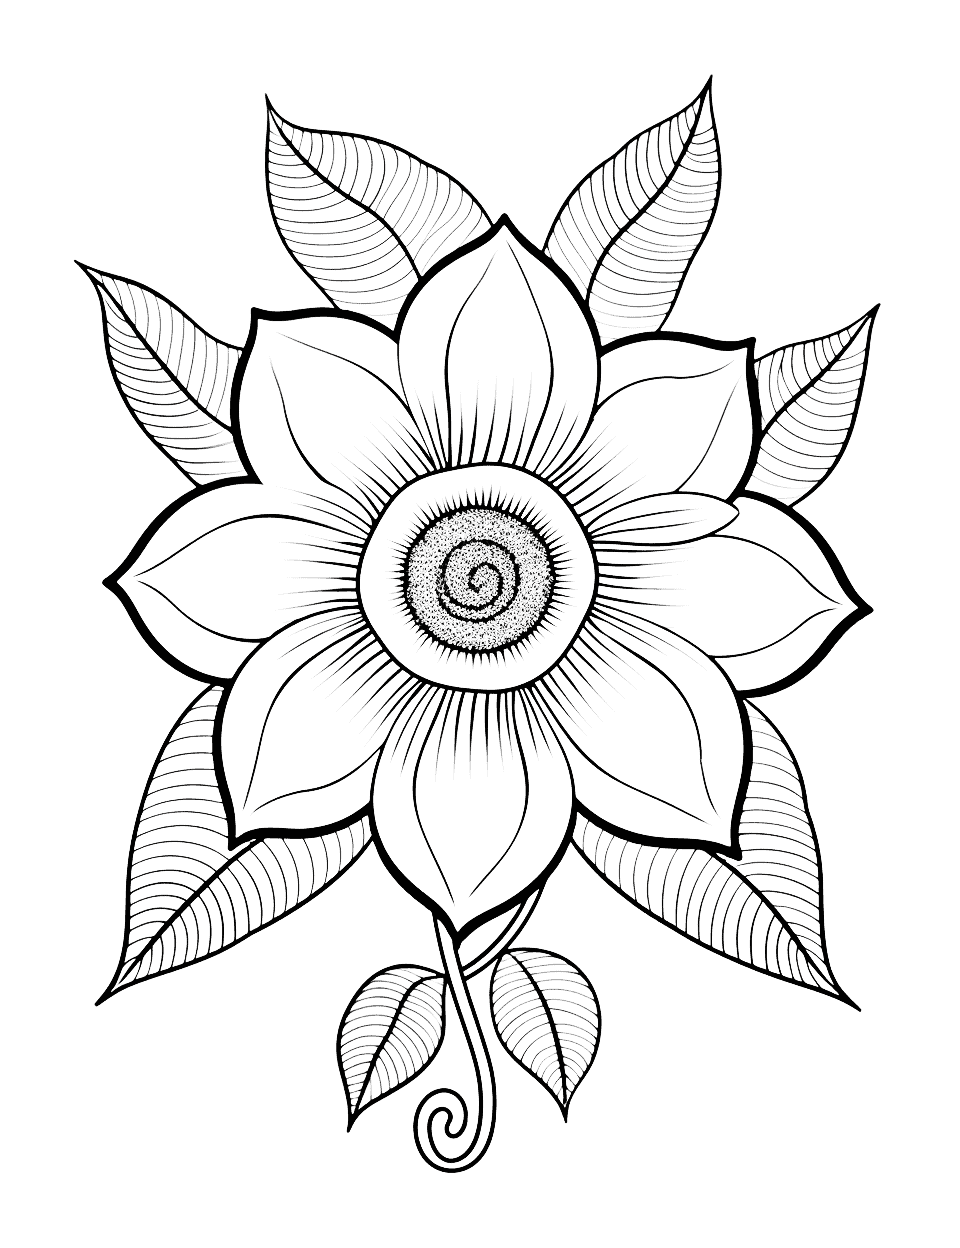 Tropical Flower Mandala Coloring Page - A complex mandala featuring a variety of tropical flowers.